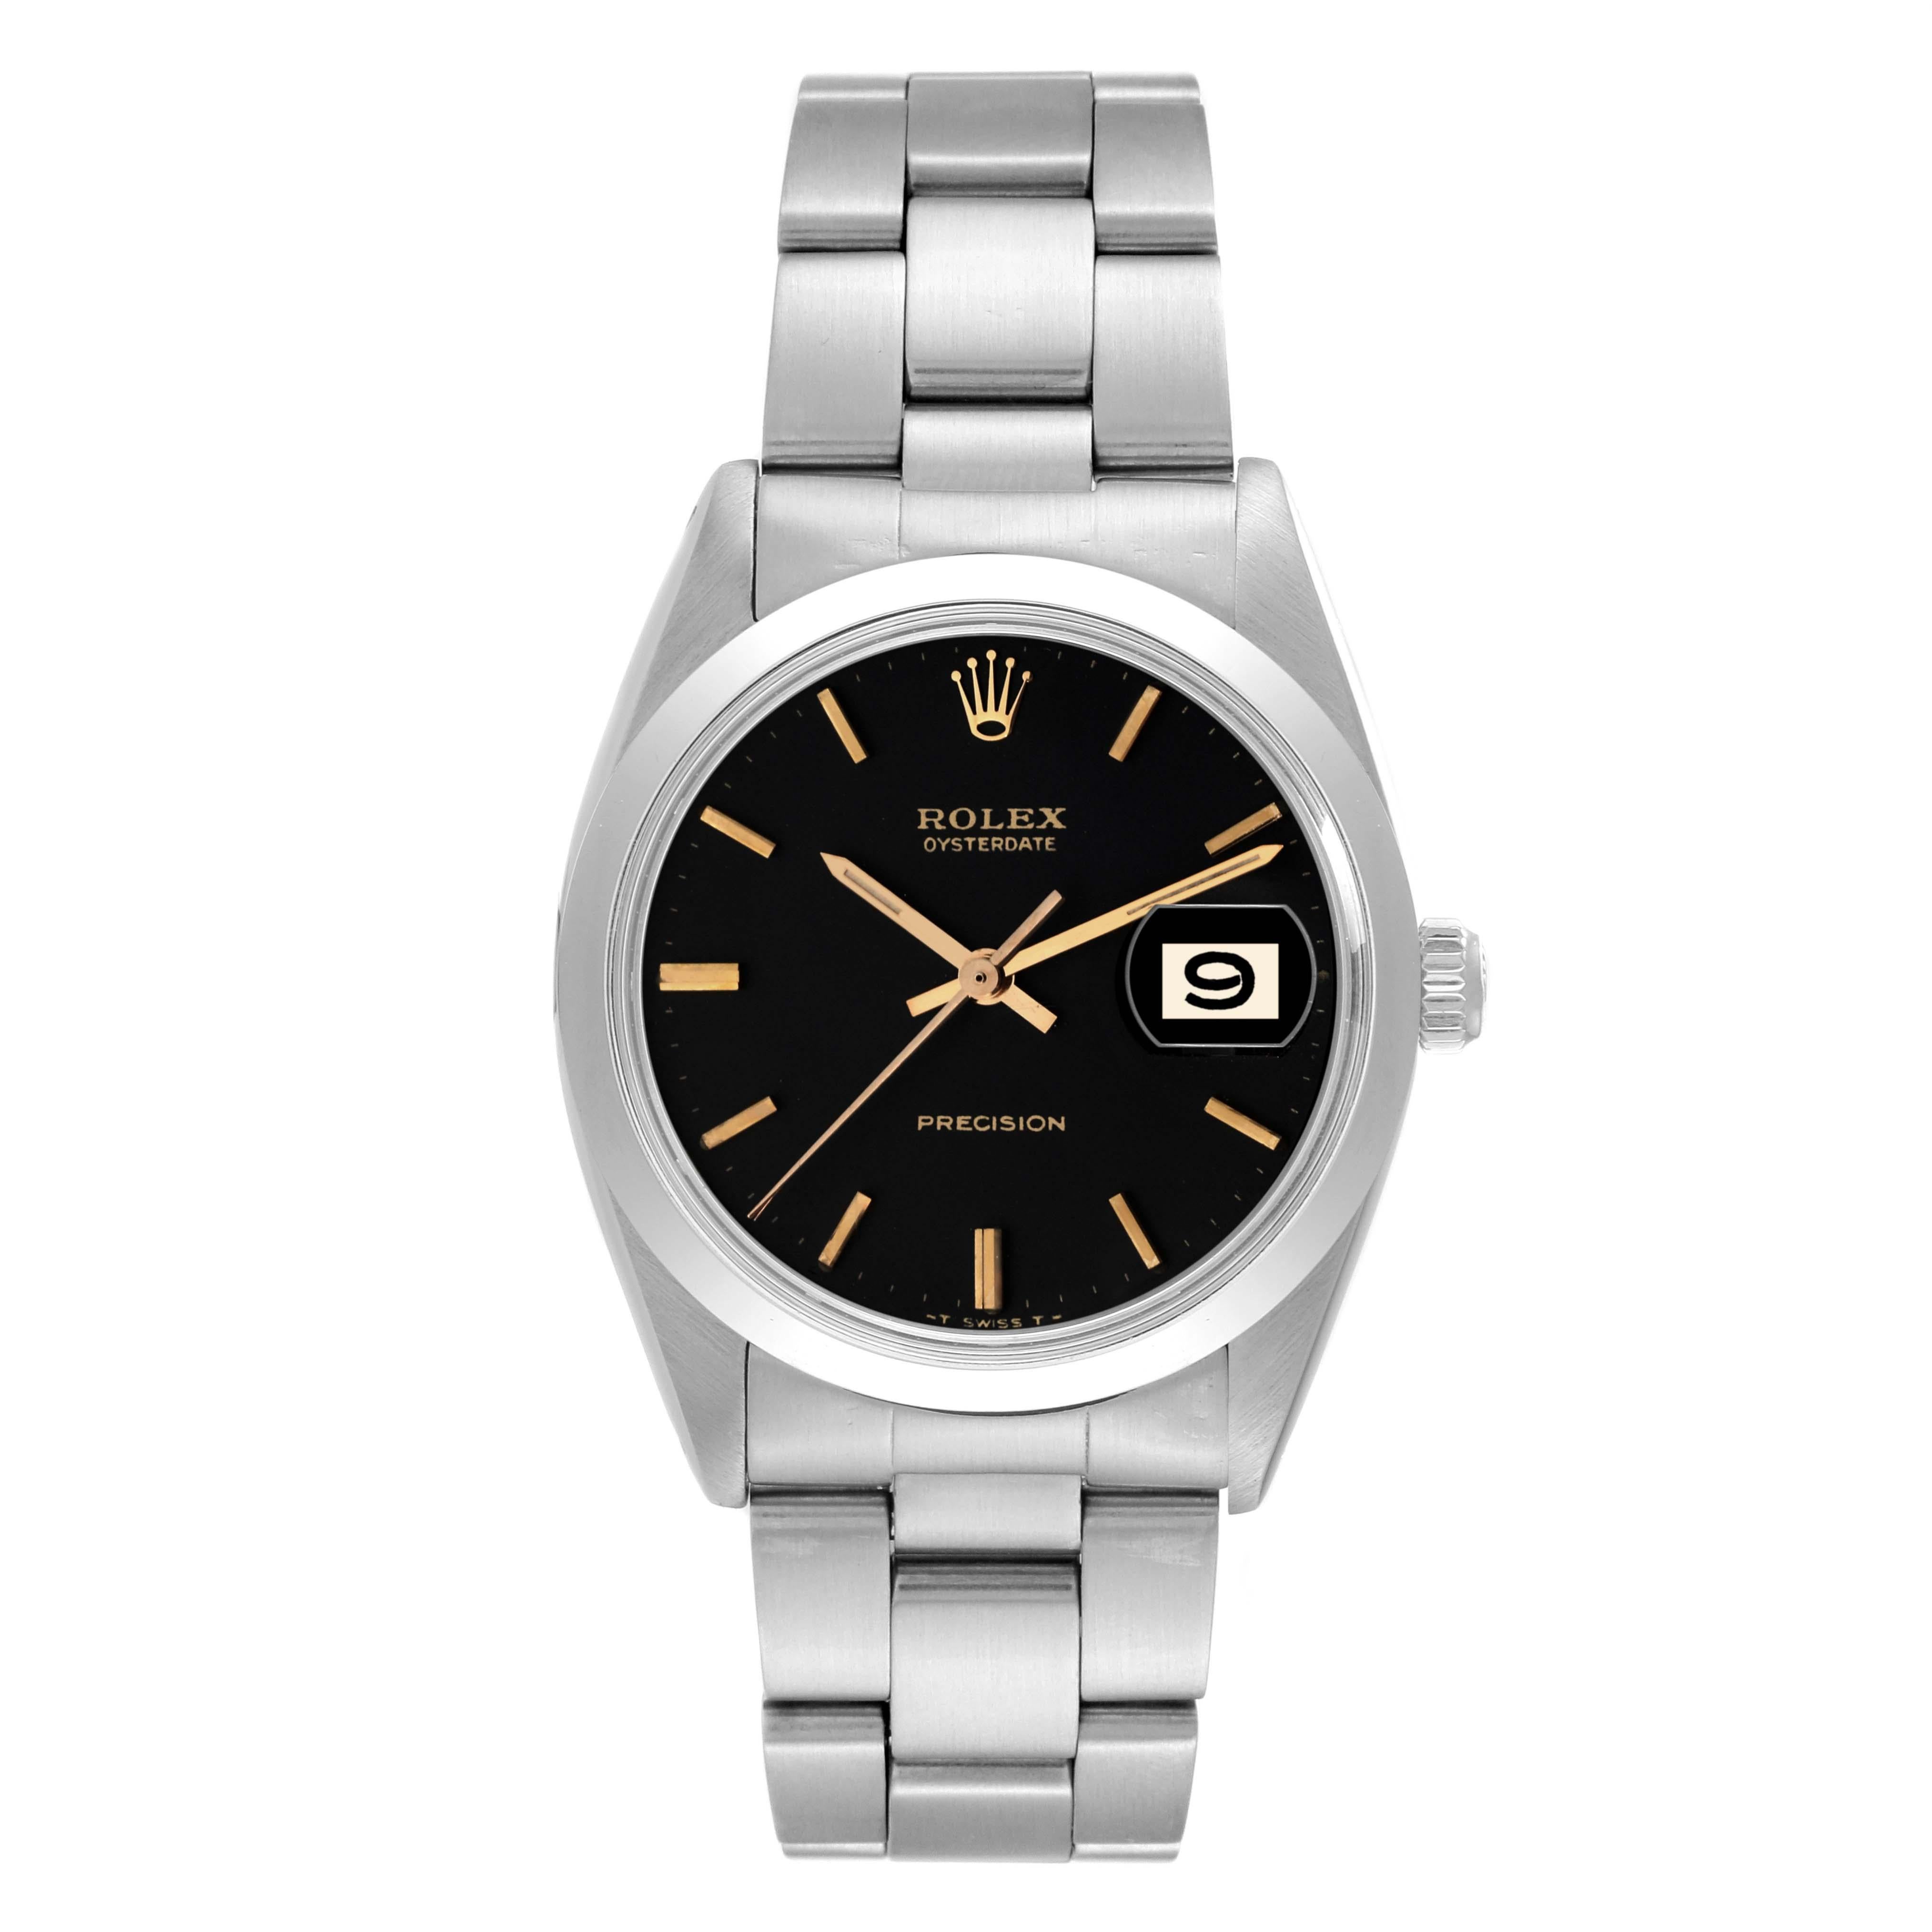 Rolex OysterDate Precision Black Dial Steel Vintage Mens Watch 6694. Manual-winding movement. Stainless steel oyster case 35.0 mm in diameter. Rolex logo on a crown. Stainless steel smooth domed bezel. Acrylic crystal with cyclops magnifier. Black